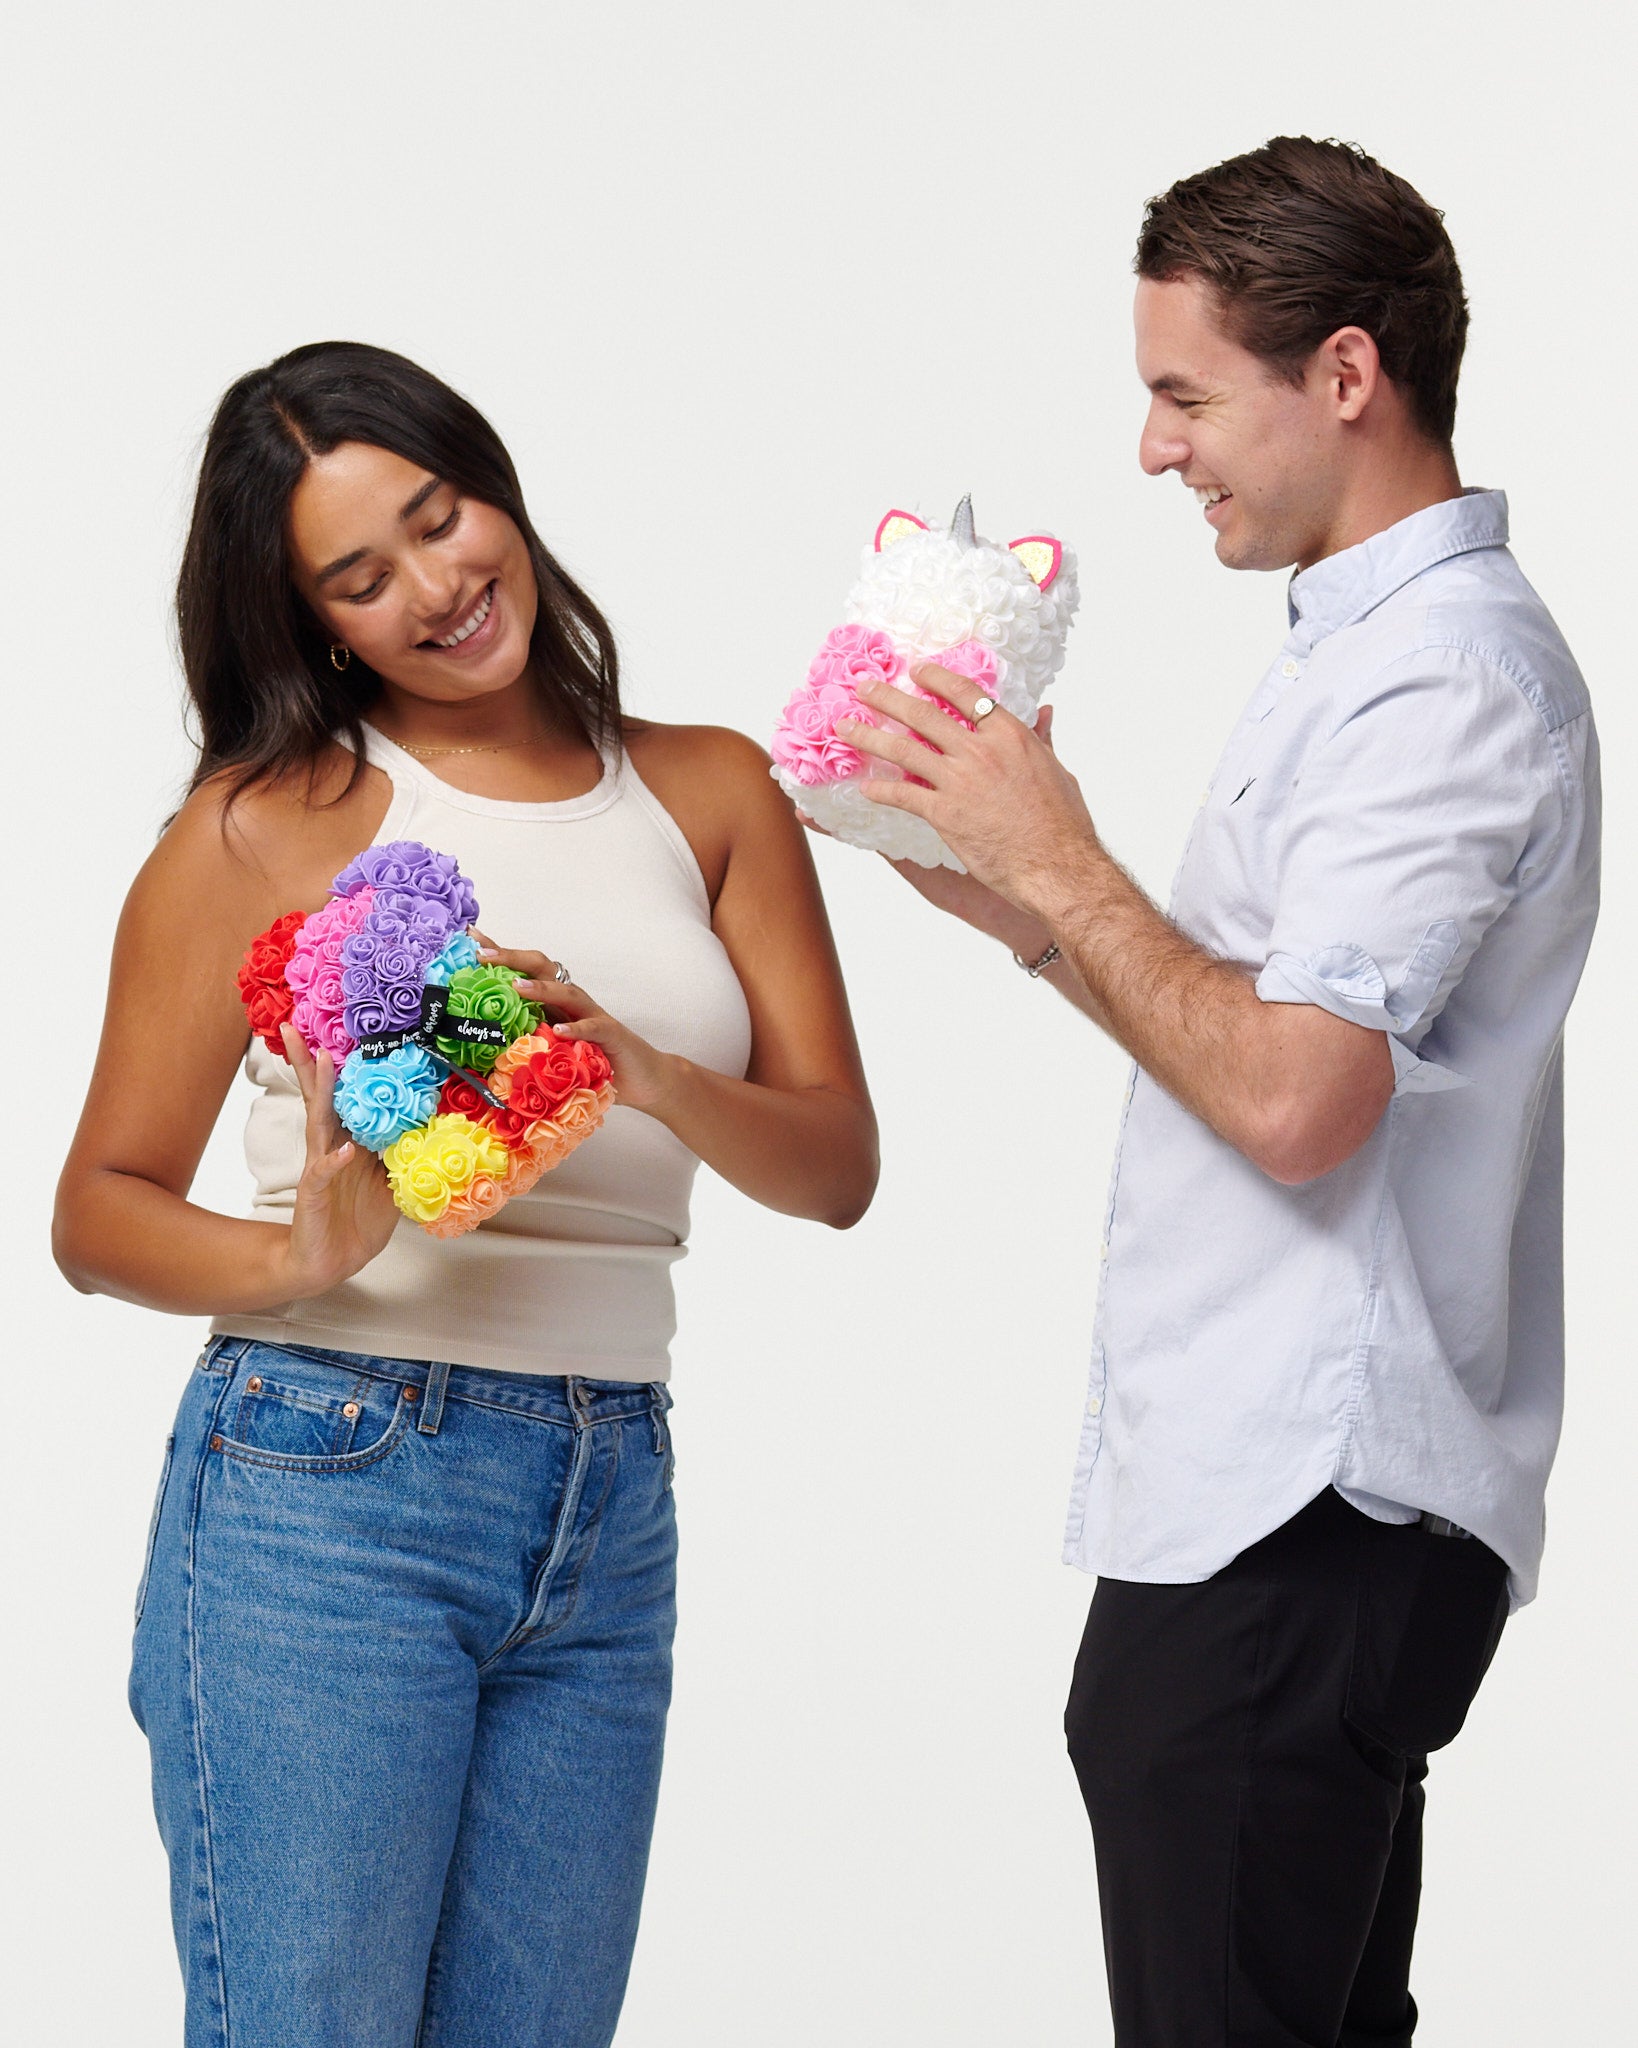 A female model in a beige tank top and blue jeans is holding a multicolored flower bear, looking down at it with a smile. Next to her, a male model in a light blue button-up shirt and black pants is admiring a white flower unicorn he holds, which has pink flowers for its mane and a silver horn. They both appear cheerful and are engaging with the artificial flower animals, creating a light-hearted and happy scene